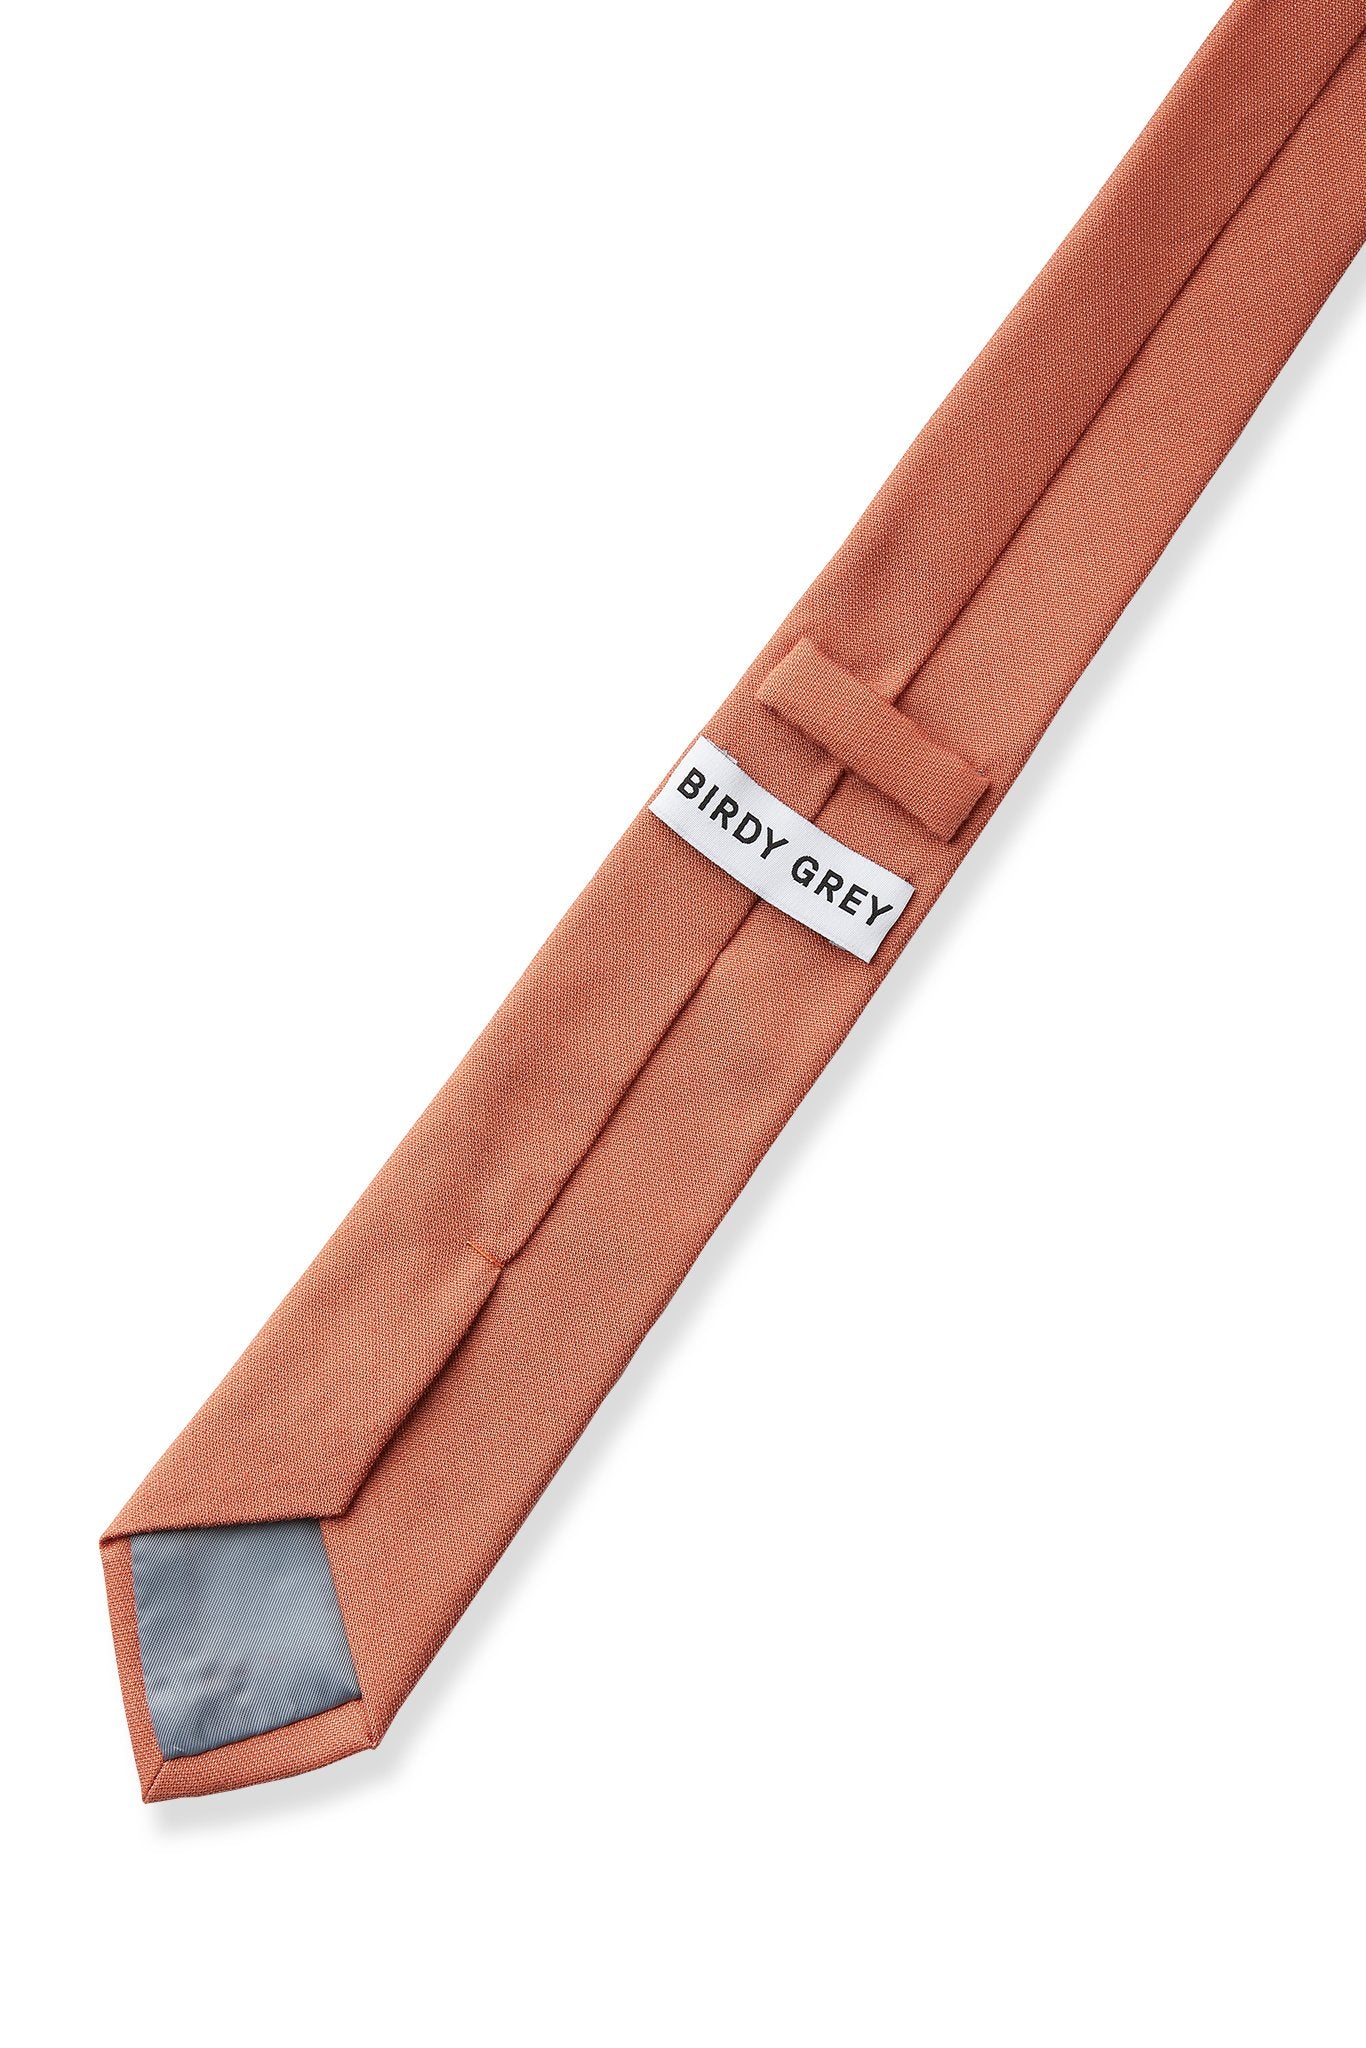 Elevated back view of the Simon Necktie in terracotta fully extended on a white background showing the necktie satin lining in grey, a keeper loop to tuck the necktie end, and a label that reads, 